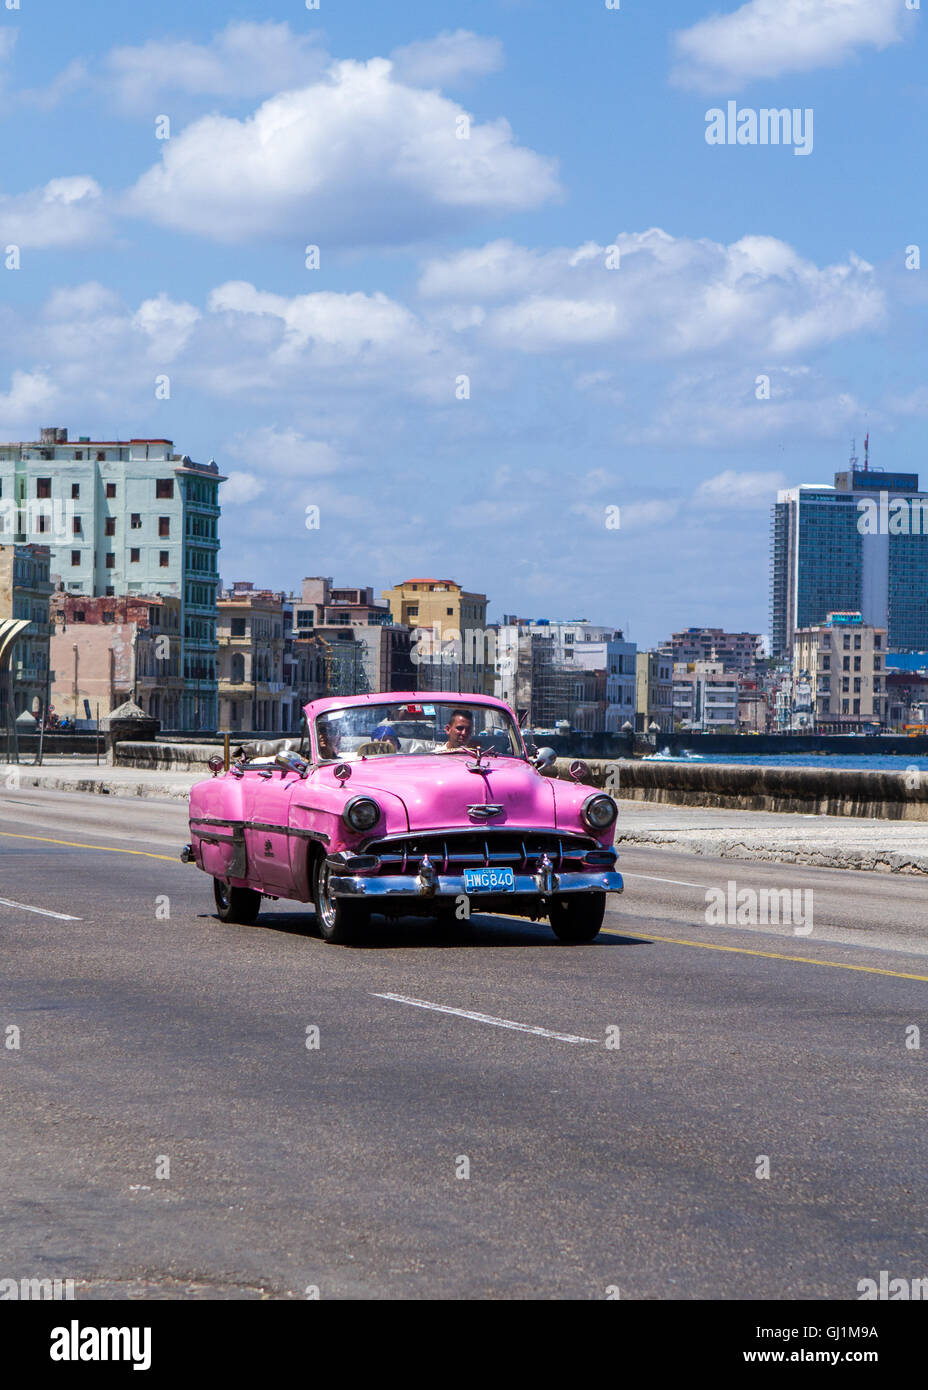 Pink open top vintage car on Malecon by the Caribbean sea, on a sunny day, Havana, Cuba, 2013 Stock Photo